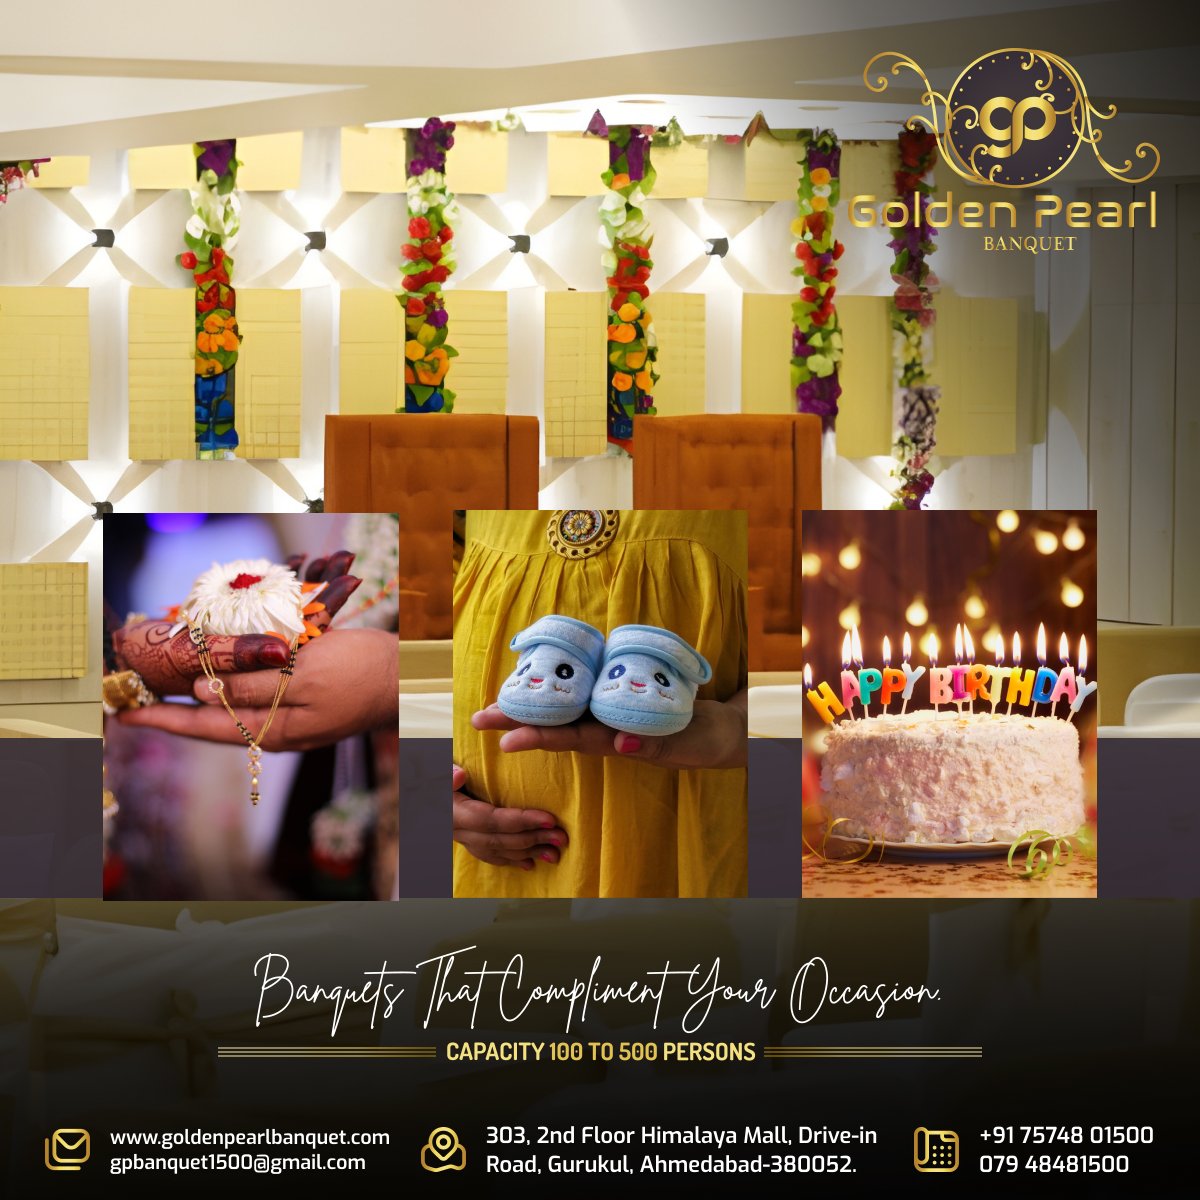 Banquets That Compliment Your Occasion

#GoldenPearl #banquet #ahmedabad #gurukulahmedabad #banquethall #event #party #wedding #birthday #ringceremony #food #enjoyment #celebrations